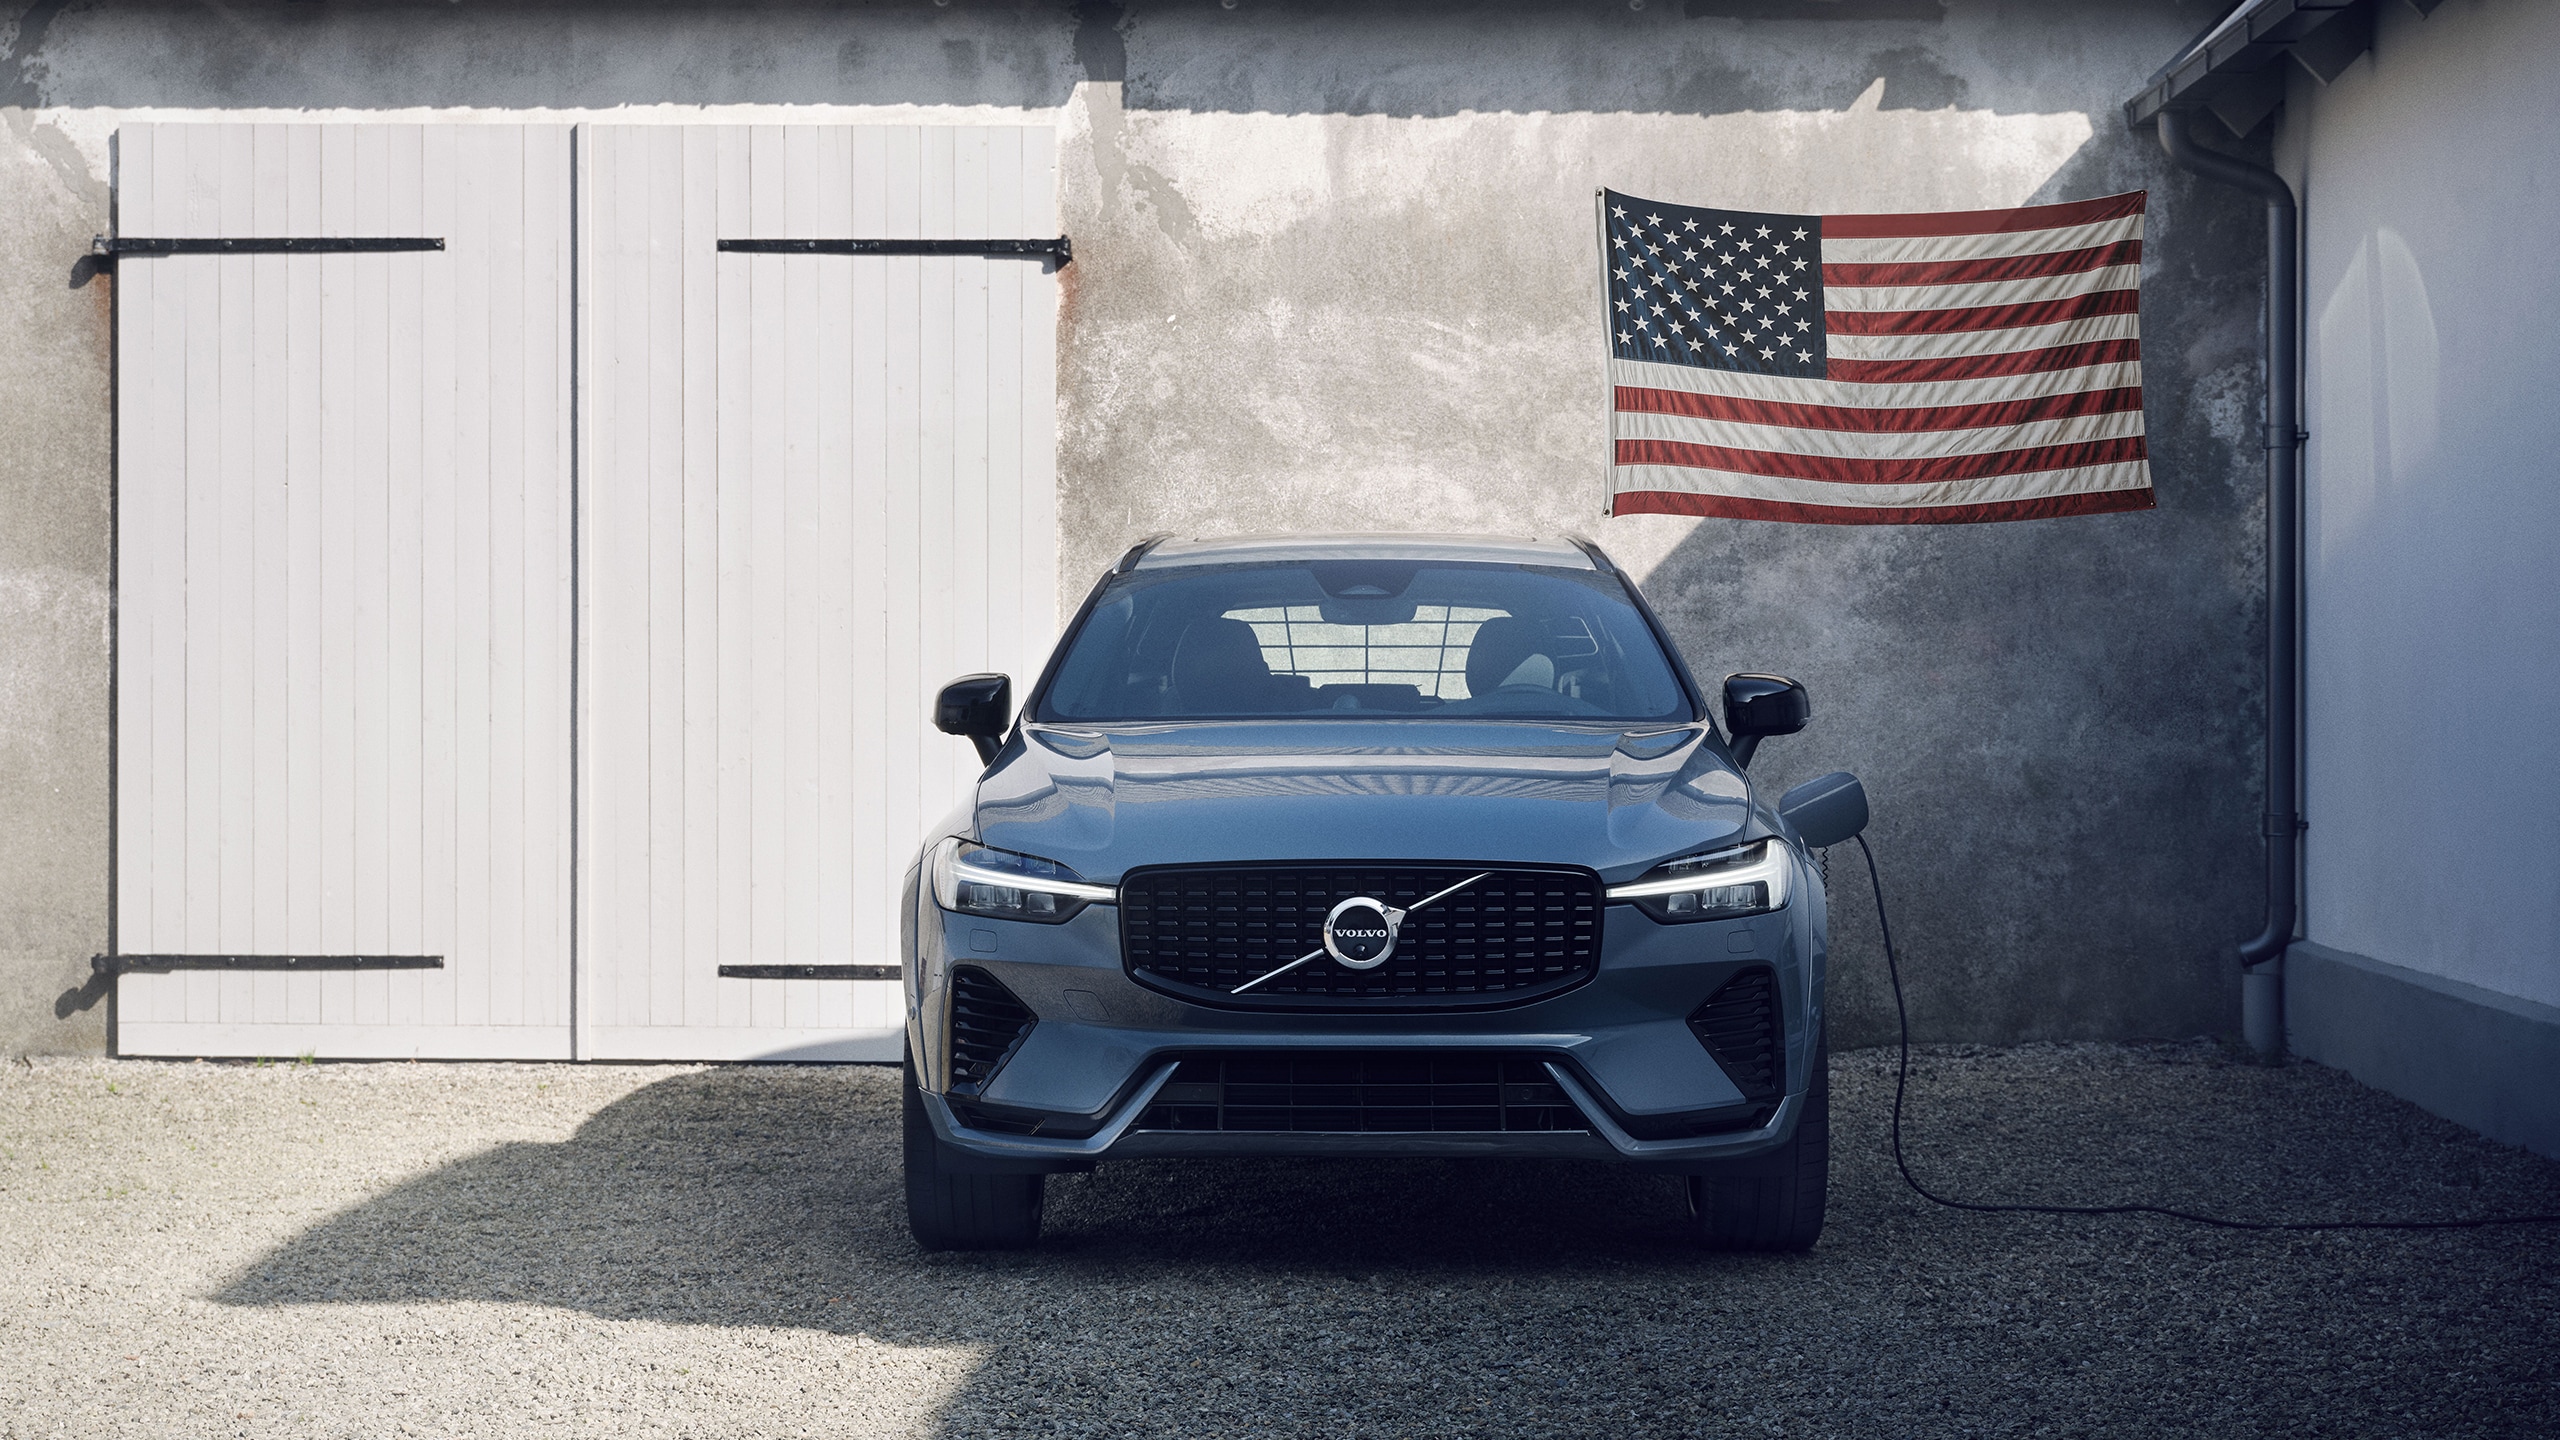 Volvo Military Program - Volvo parked by garage with American flag